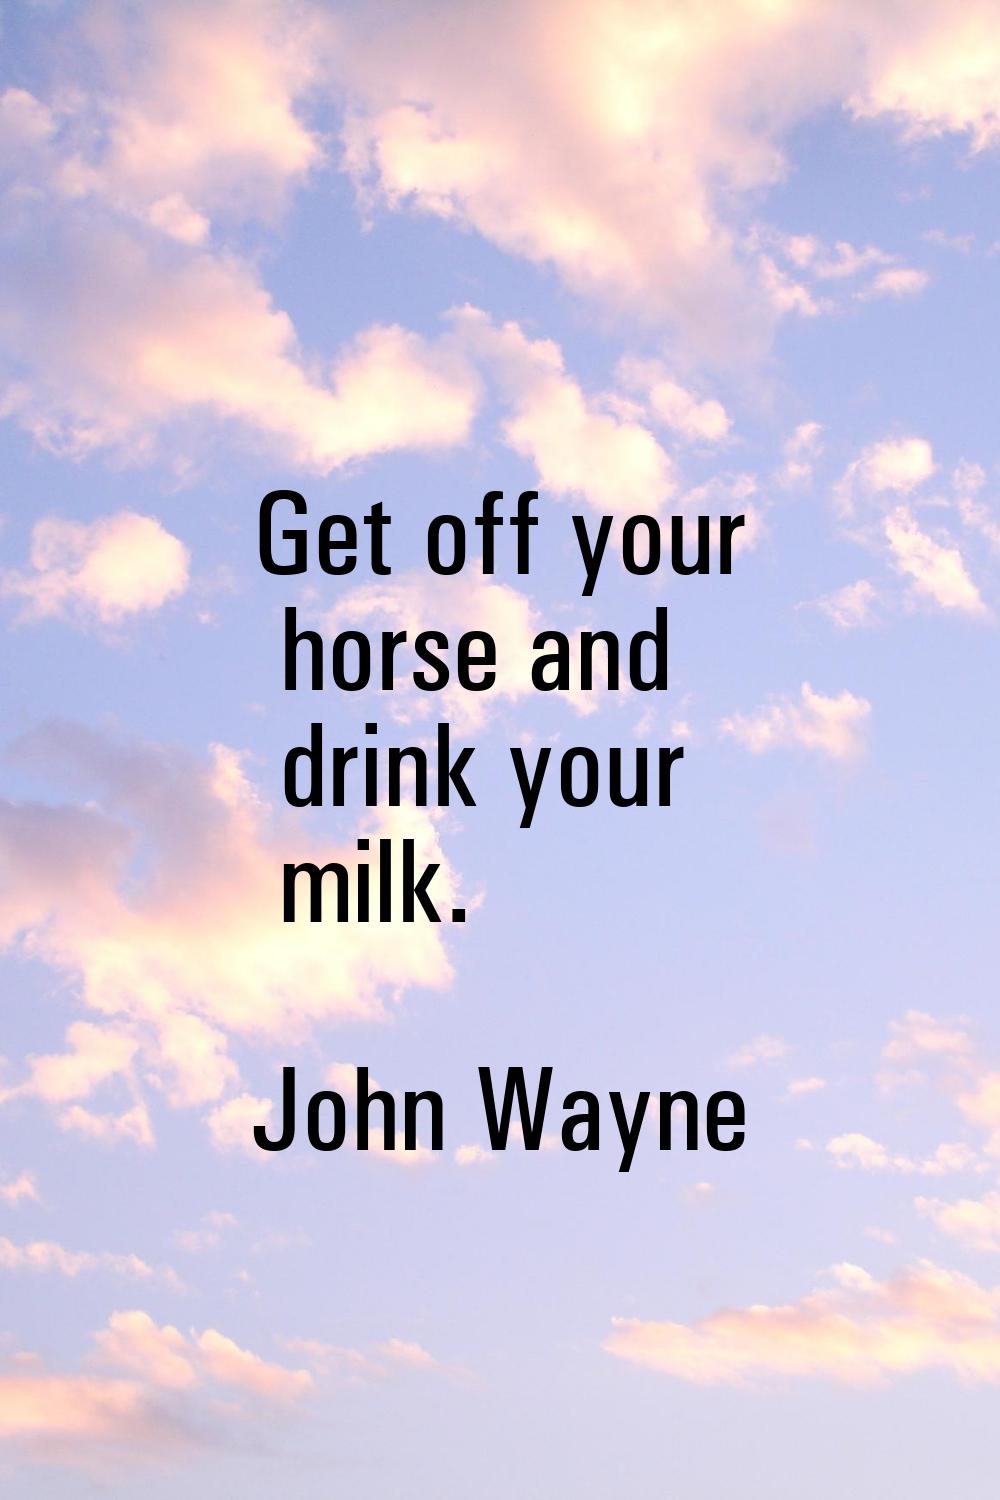 Get off your horse and drink your milk.